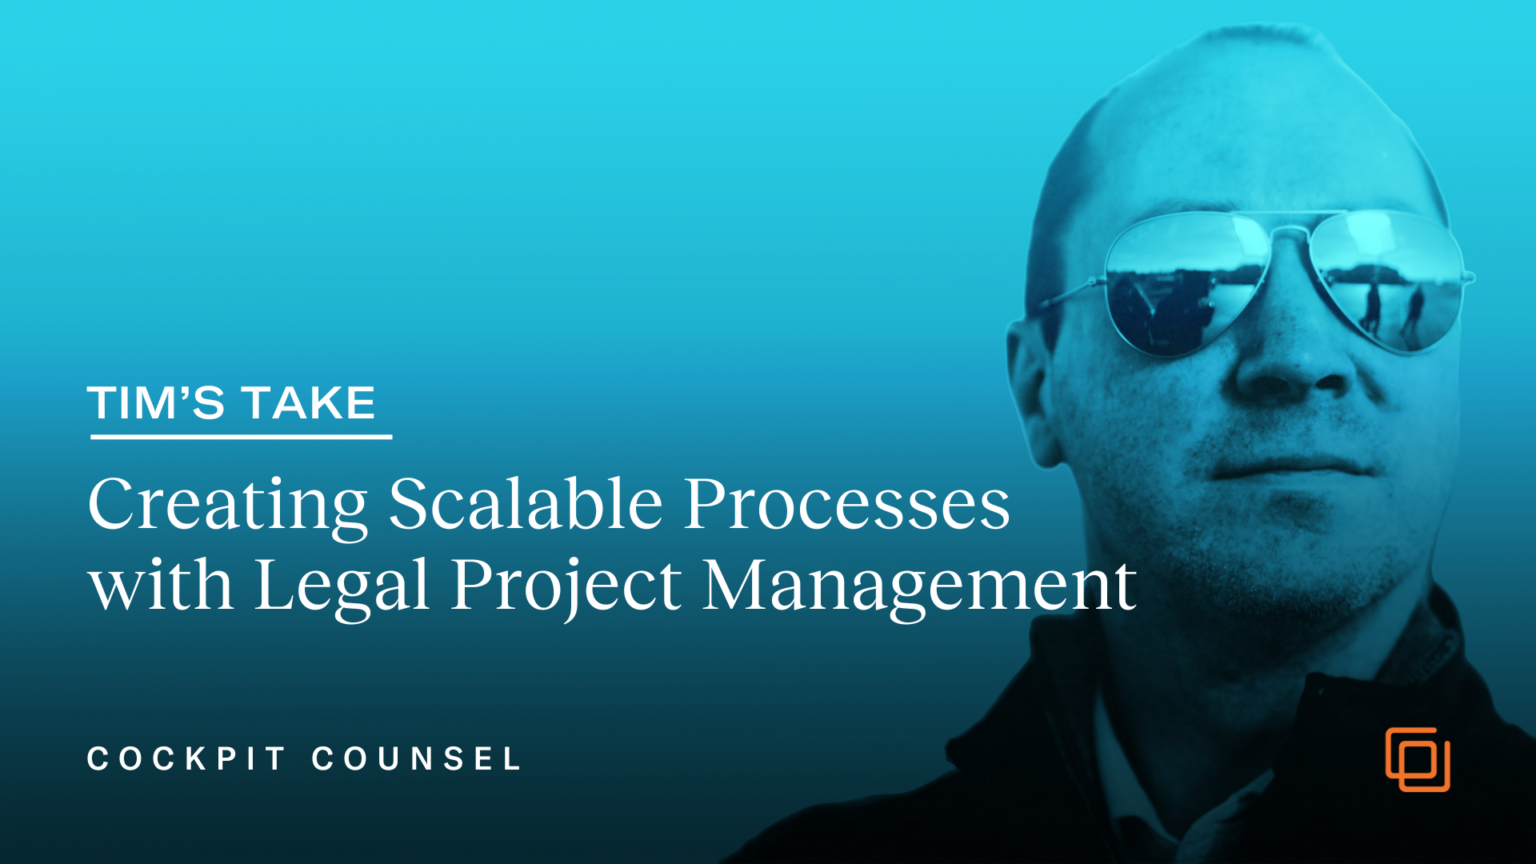 Cockpit Counsel: Creating Scalable Processes with Legal Project Management